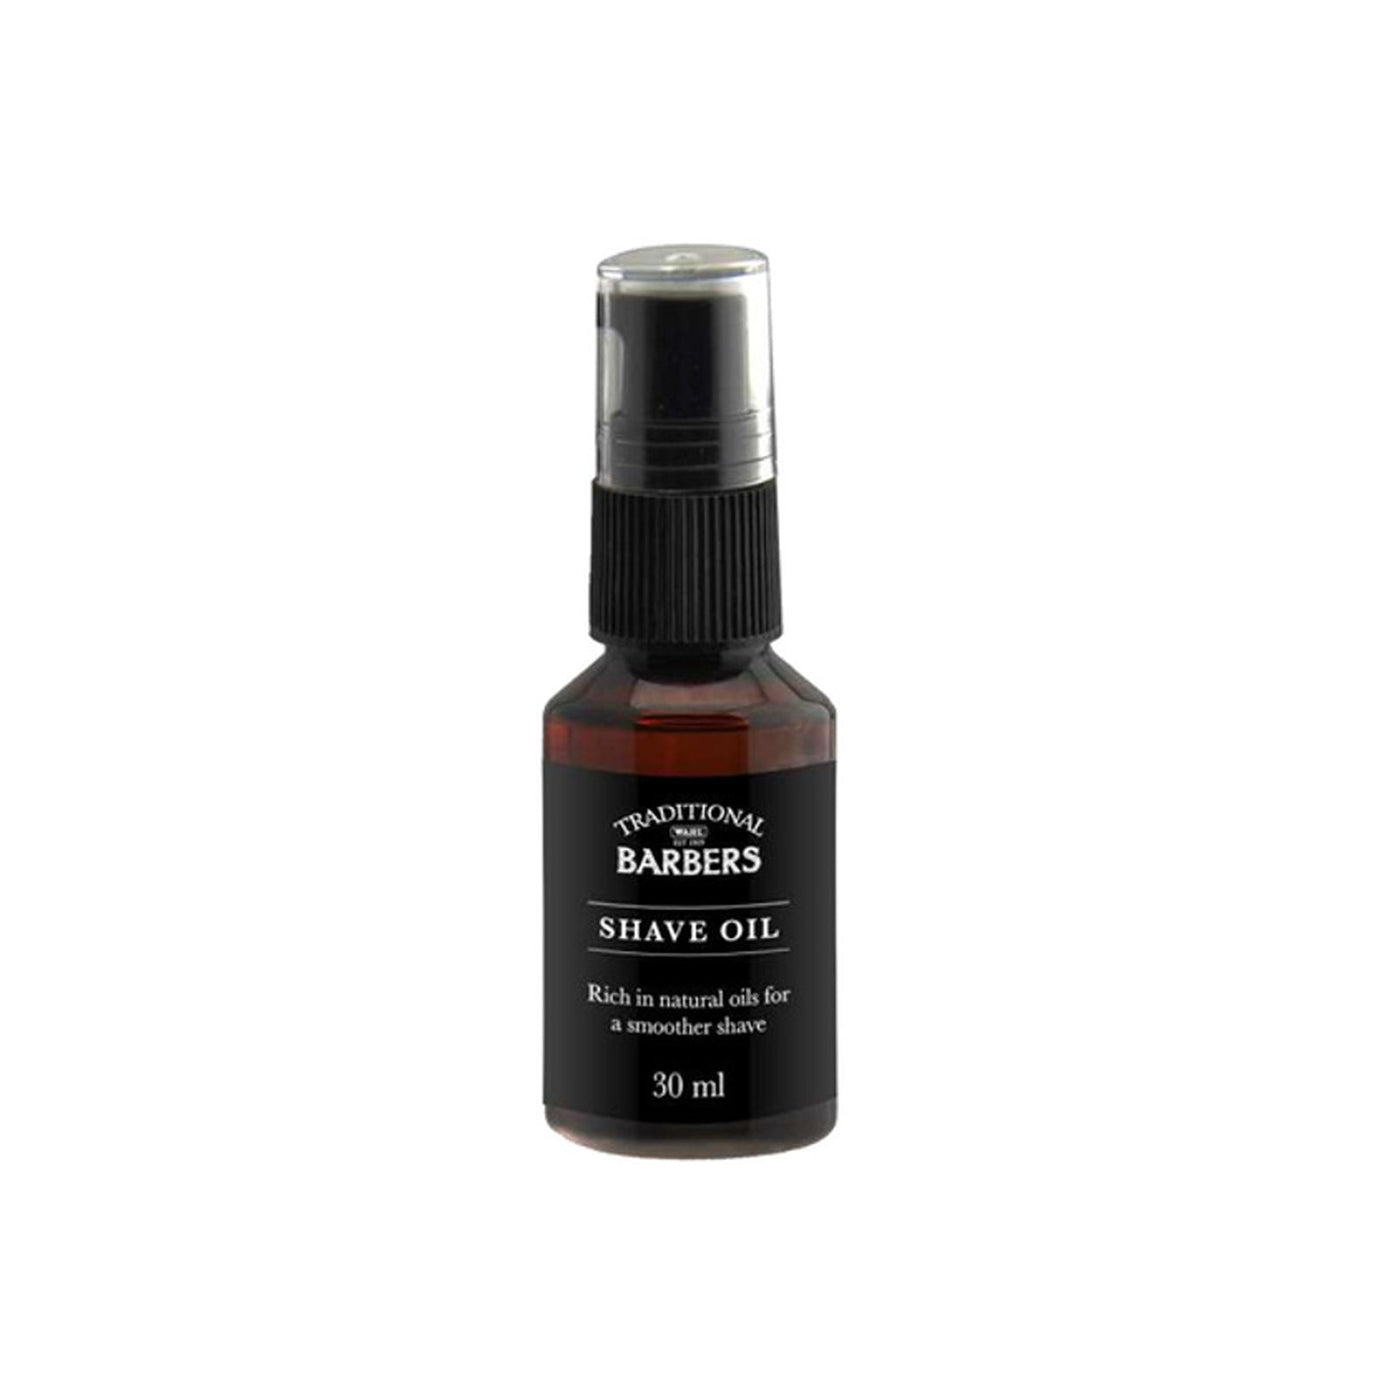 Wahl Traditional Barbers Shave Oil (30ml)